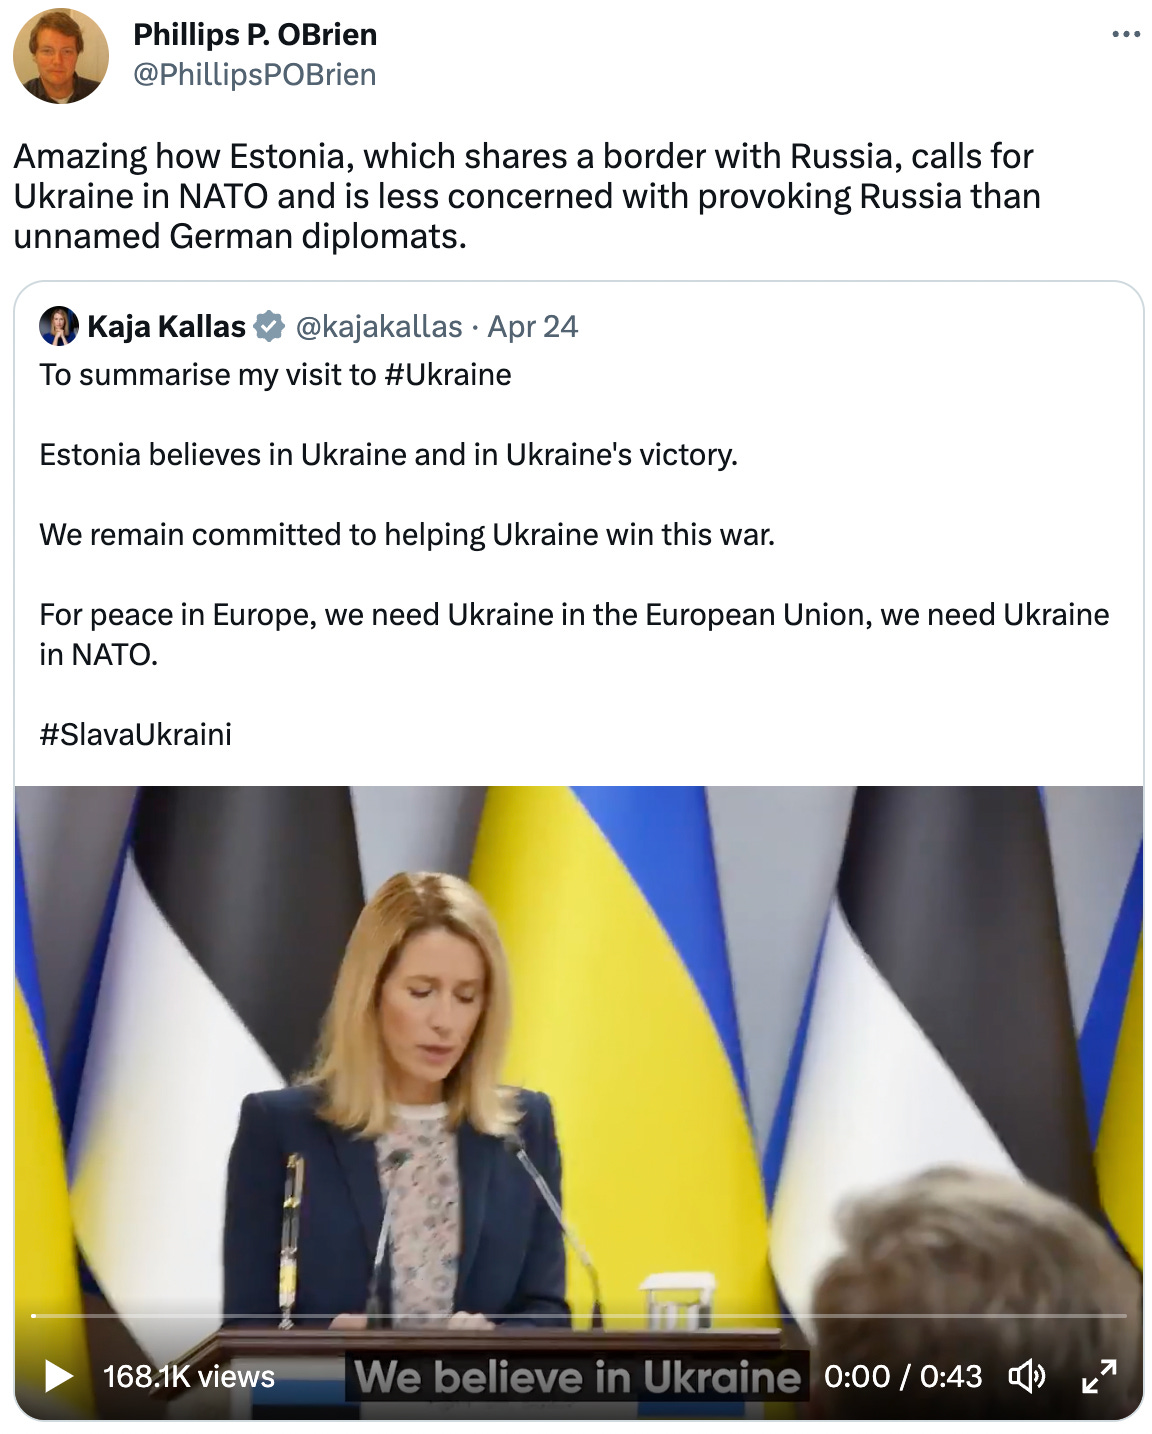  See new Tweets Conversation Phillips P. OBrien @PhillipsPOBrien Amazing how Estonia, which shares a border with Russia, calls for Ukraine in NATO and is less concerned with provoking Russia than unnamed German diplomats. Quote Tweet Kaja Kallas @kajakallas · Apr 24 To summarise my visit to #Ukraine  Estonia believes in Ukraine and in Ukraine's victory.  We remain committed to helping Ukraine win this war.  For peace in Europe, we need Ukraine in the European Union, we need Ukraine in NATO.  #SlavaUkraini